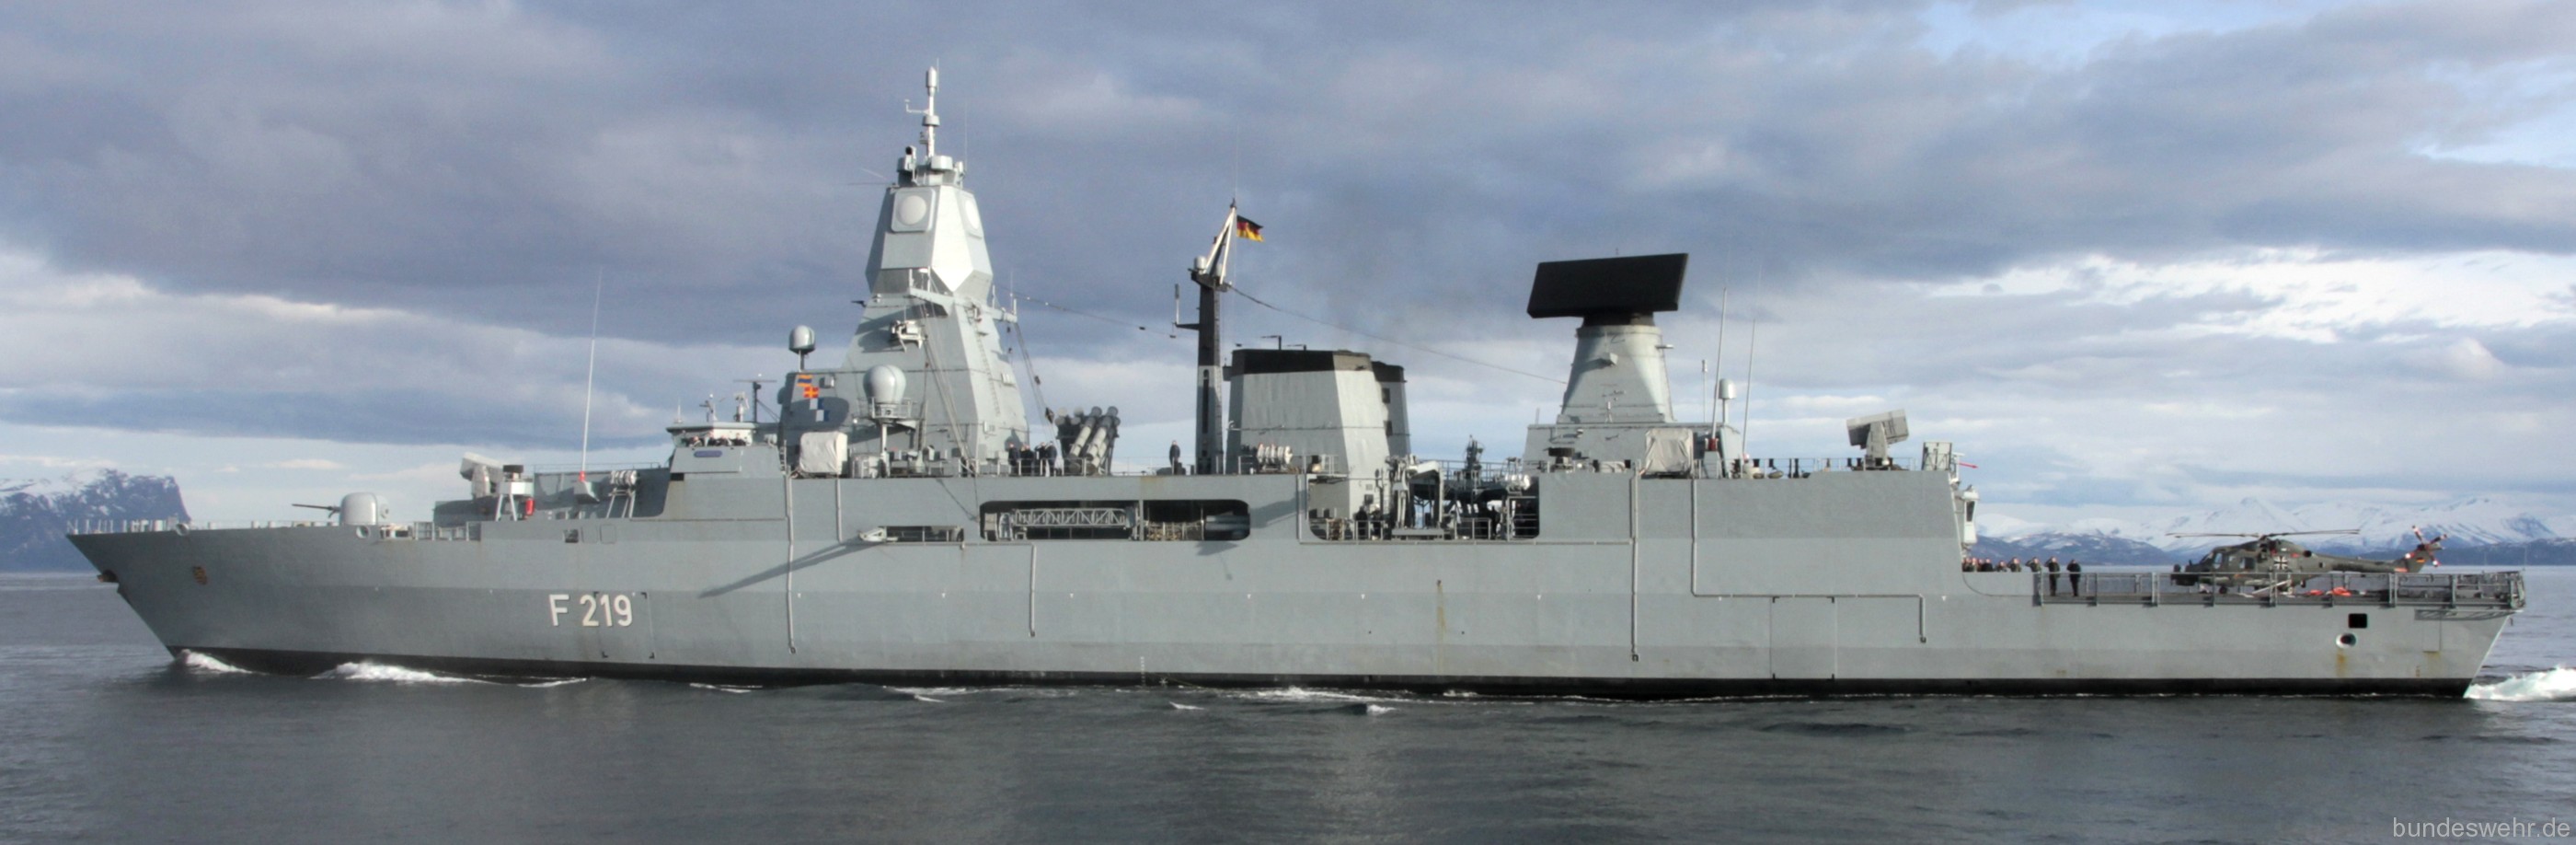 f-219 fgs sachsen type 124 class guided missile frigate ffg german navy 21